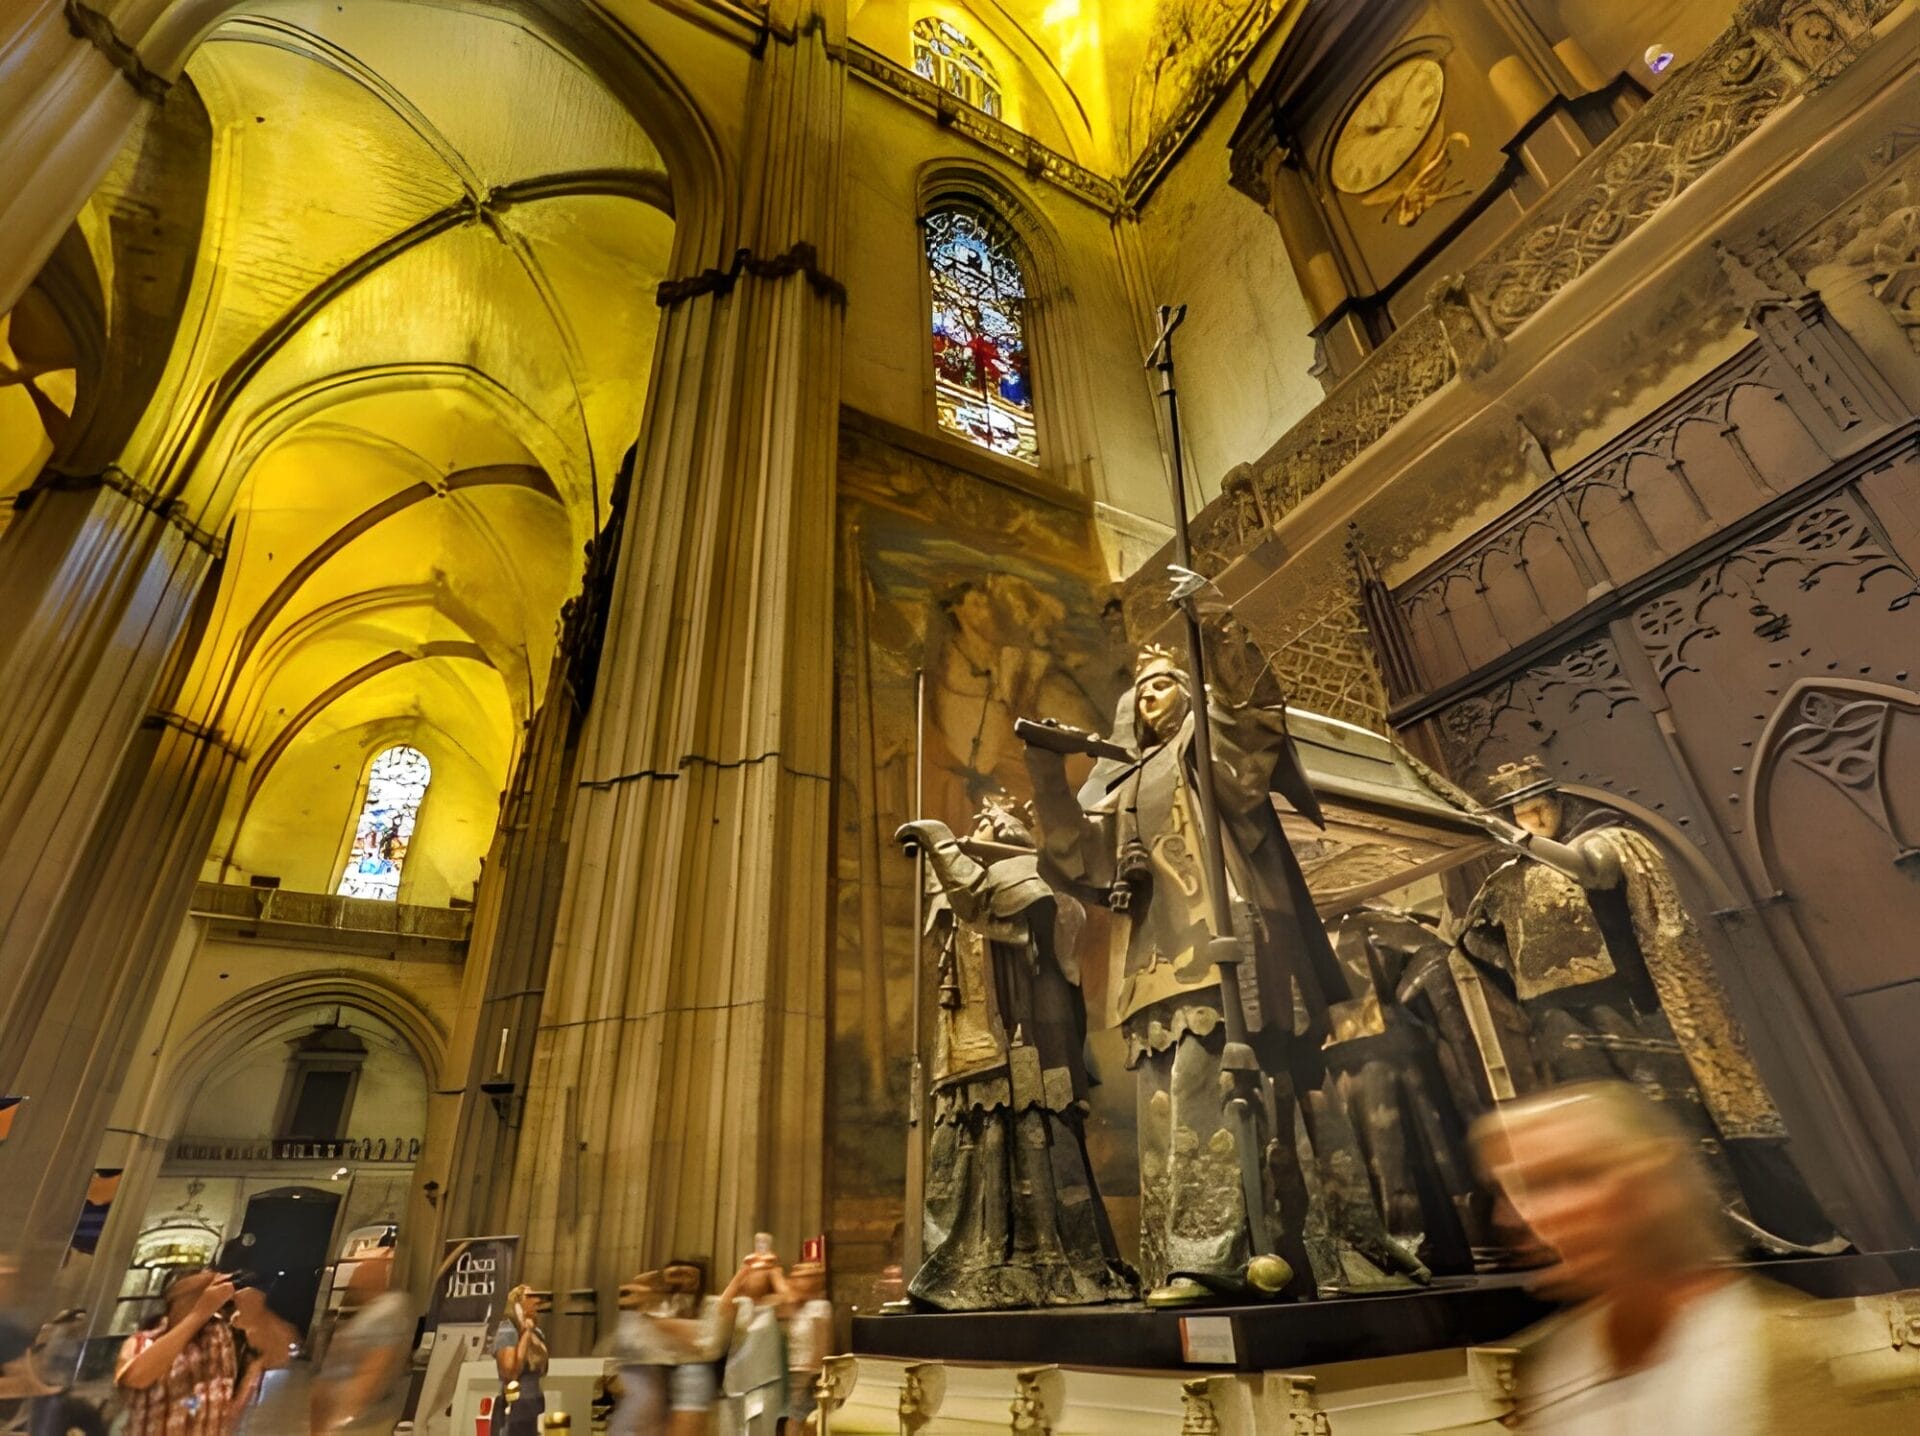 Seville itinerary - Tomb of Christopher Columbus